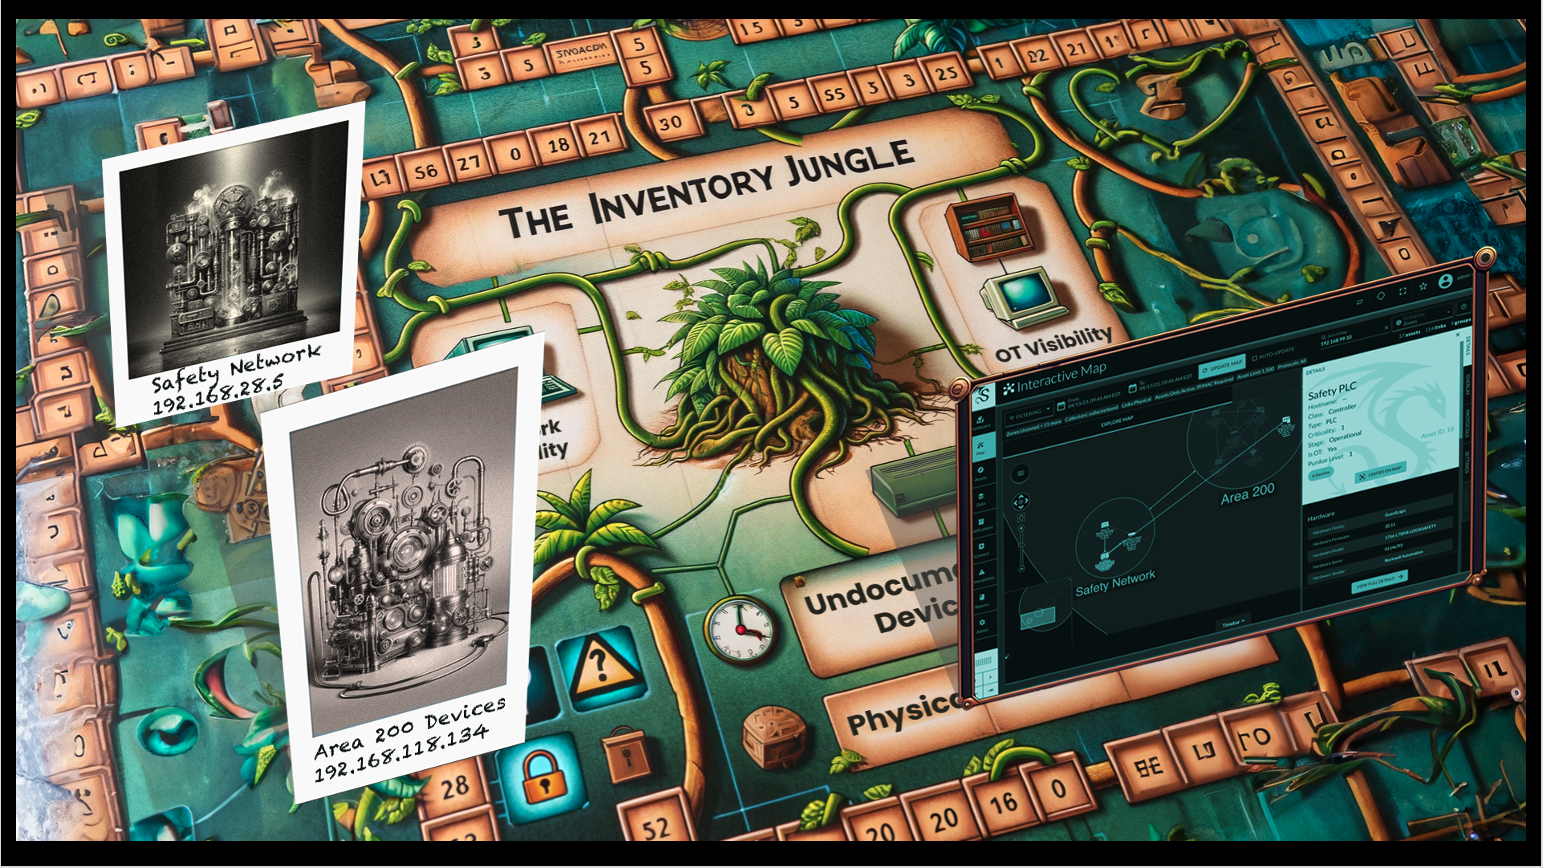 Into the Thicket: The Inventory Jungle and Beyond